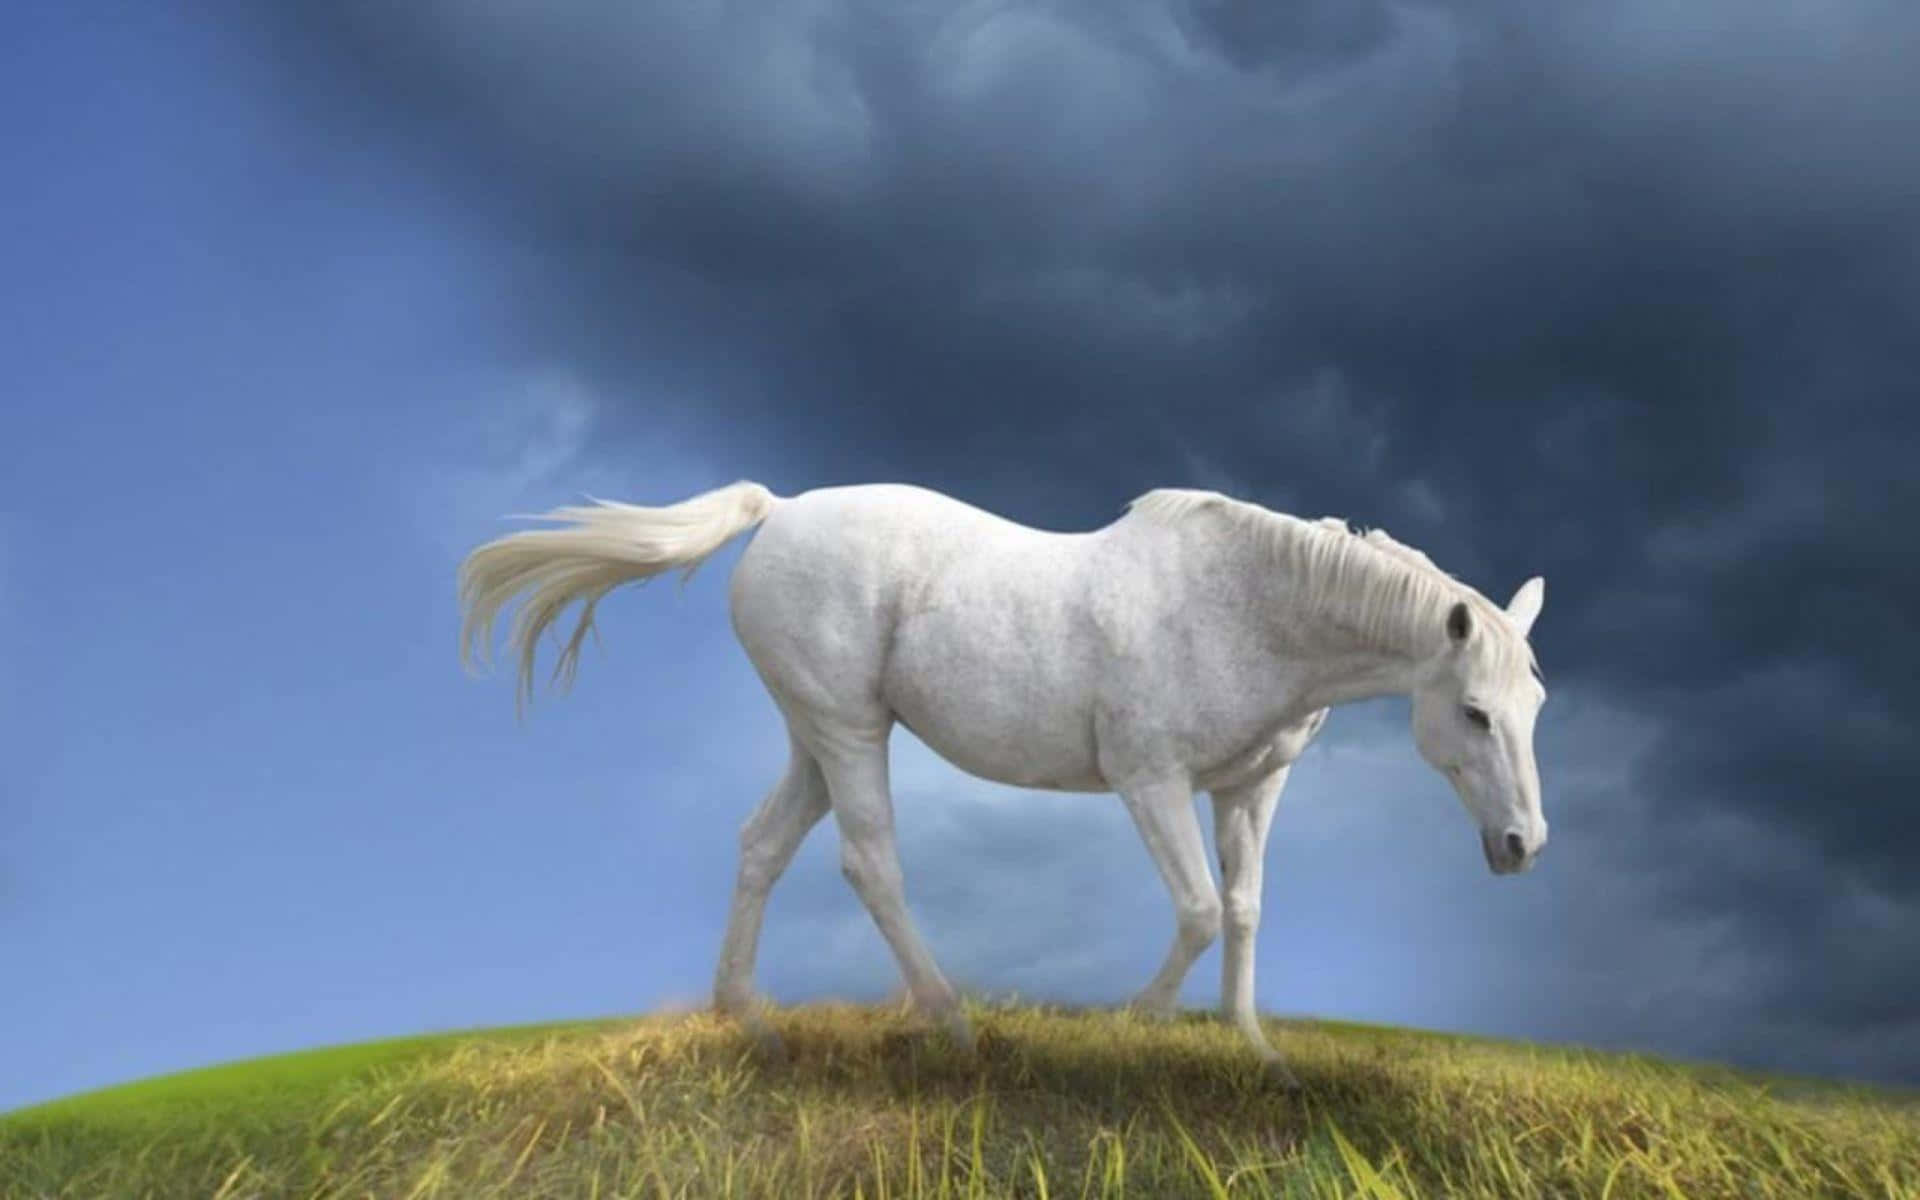 "A majestic white horse gallops across the countryside"